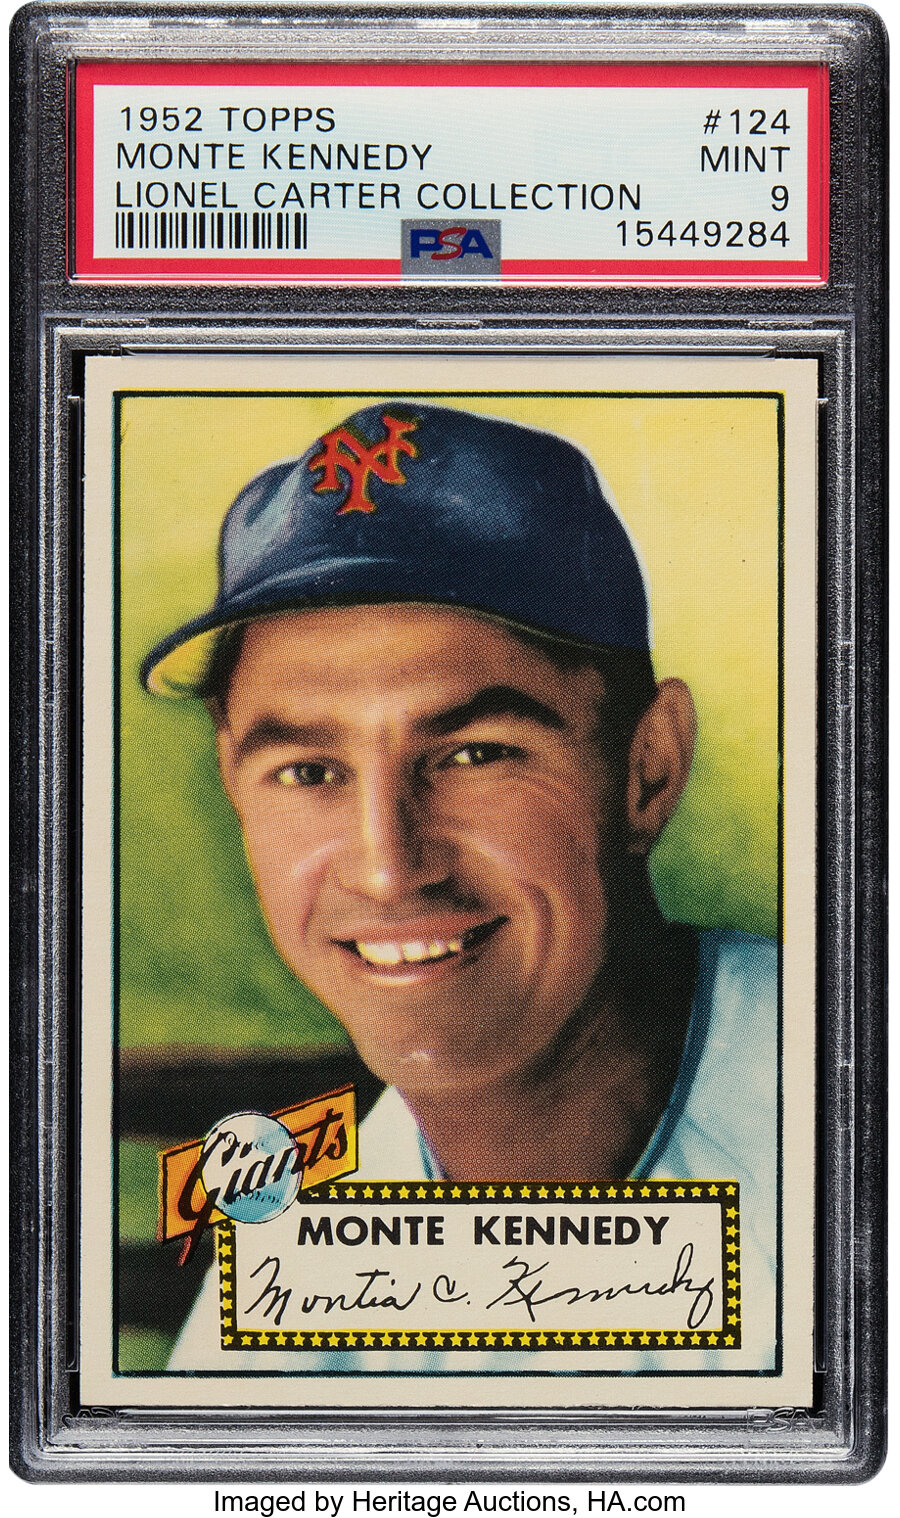 1952 Topps Monte Kennedy #124 PSA Mint 9 - Pop Seven, None Superior! From the Lionel Carter Collection